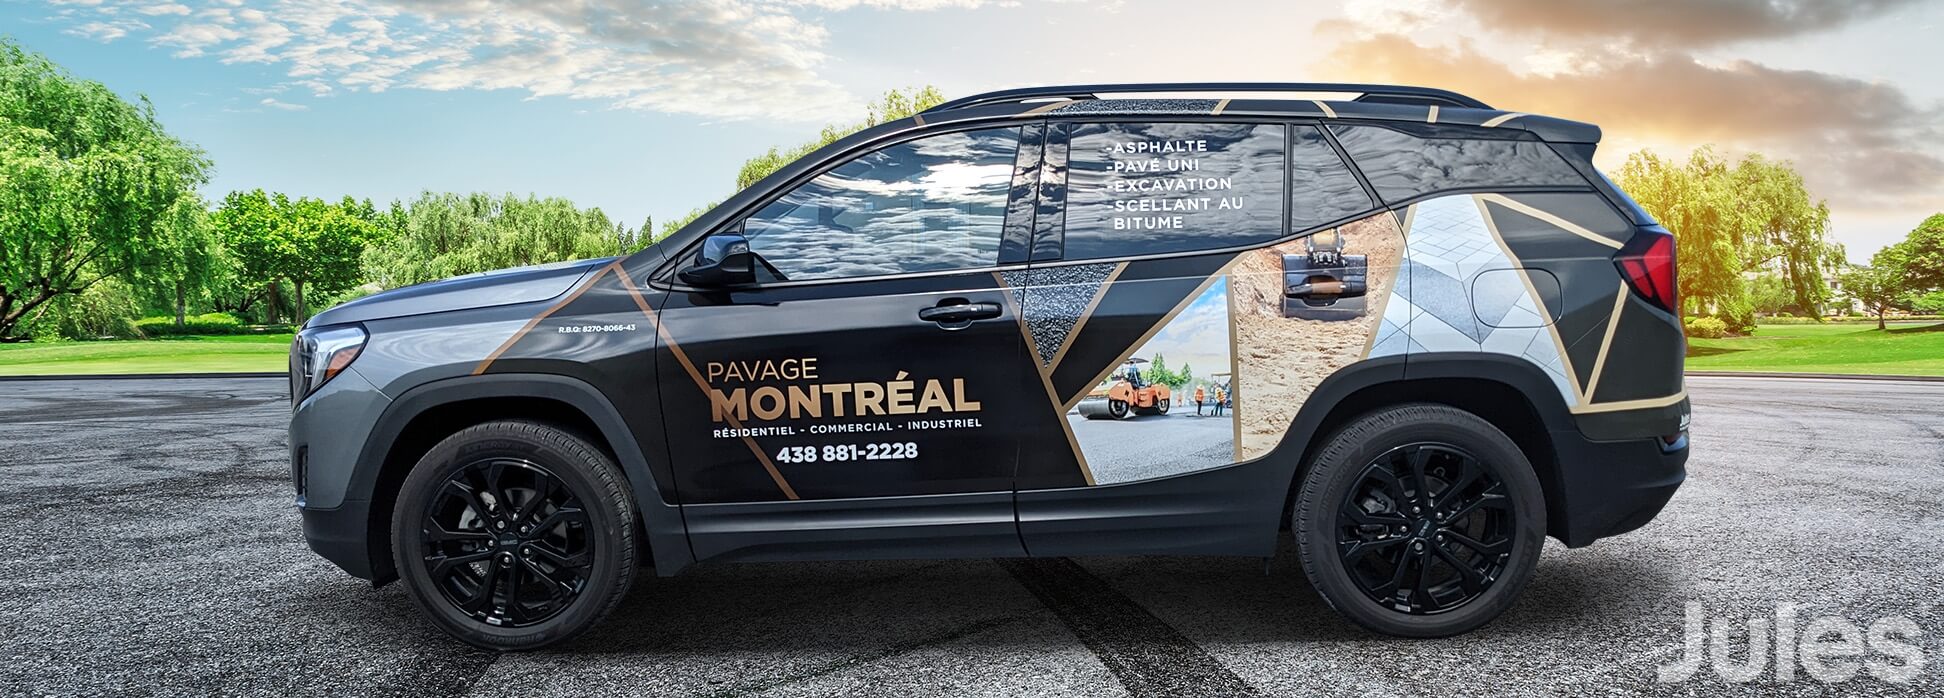 PAVAGE MONTREAL LETTRAGE WRAP